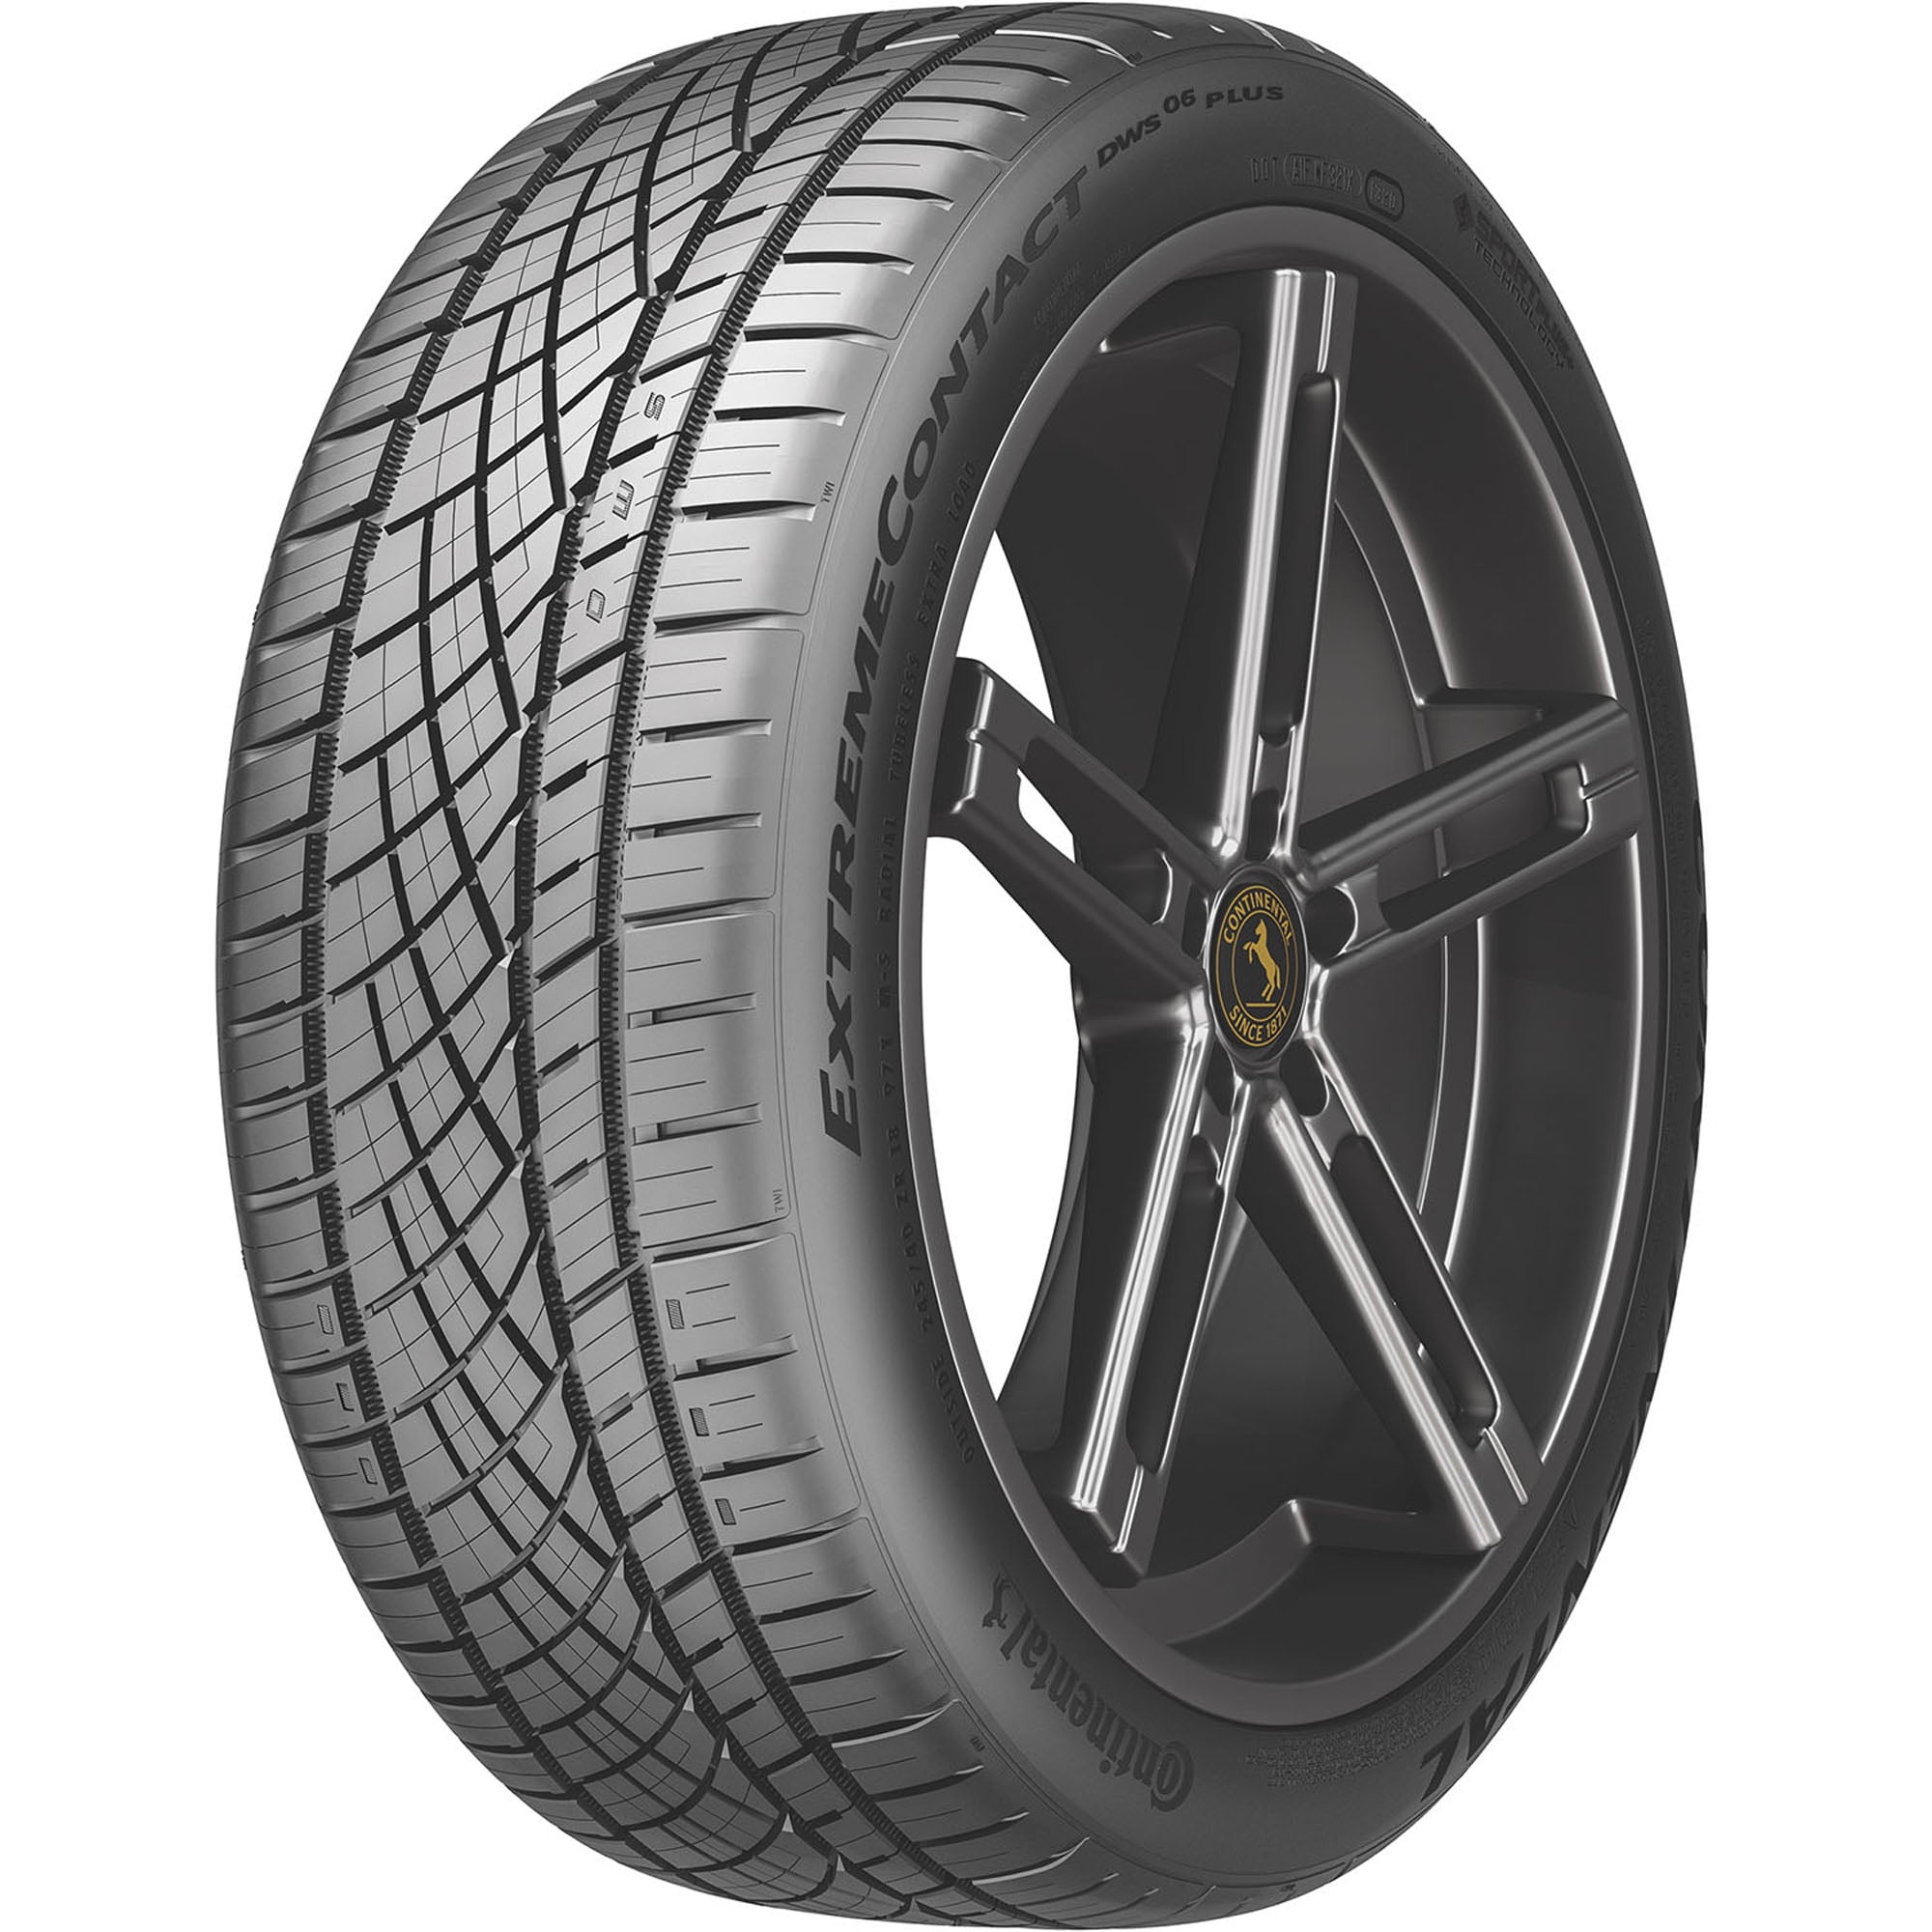 Continental ExtremeContact DWS06 PLUS All Season 245/50ZR18 100W